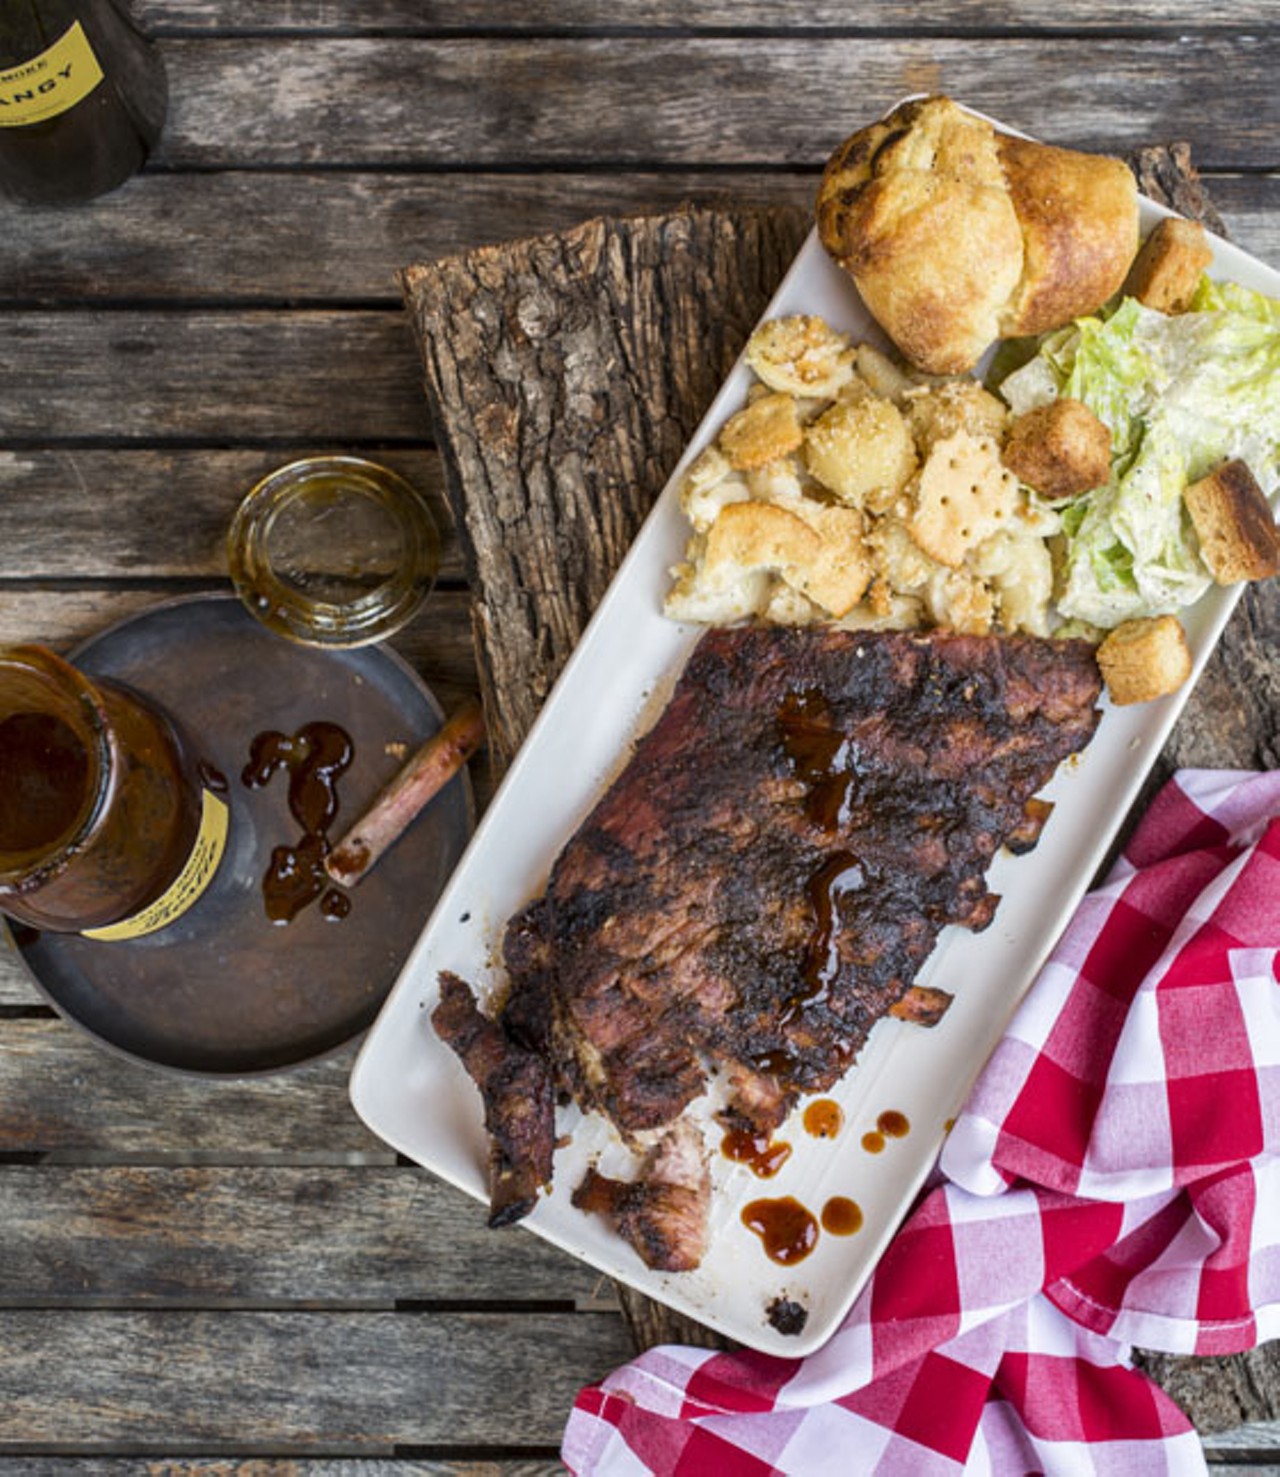 St. Louis Cut Ribs with a side of White Cheddar Cracker Mac and side Caesar salad.